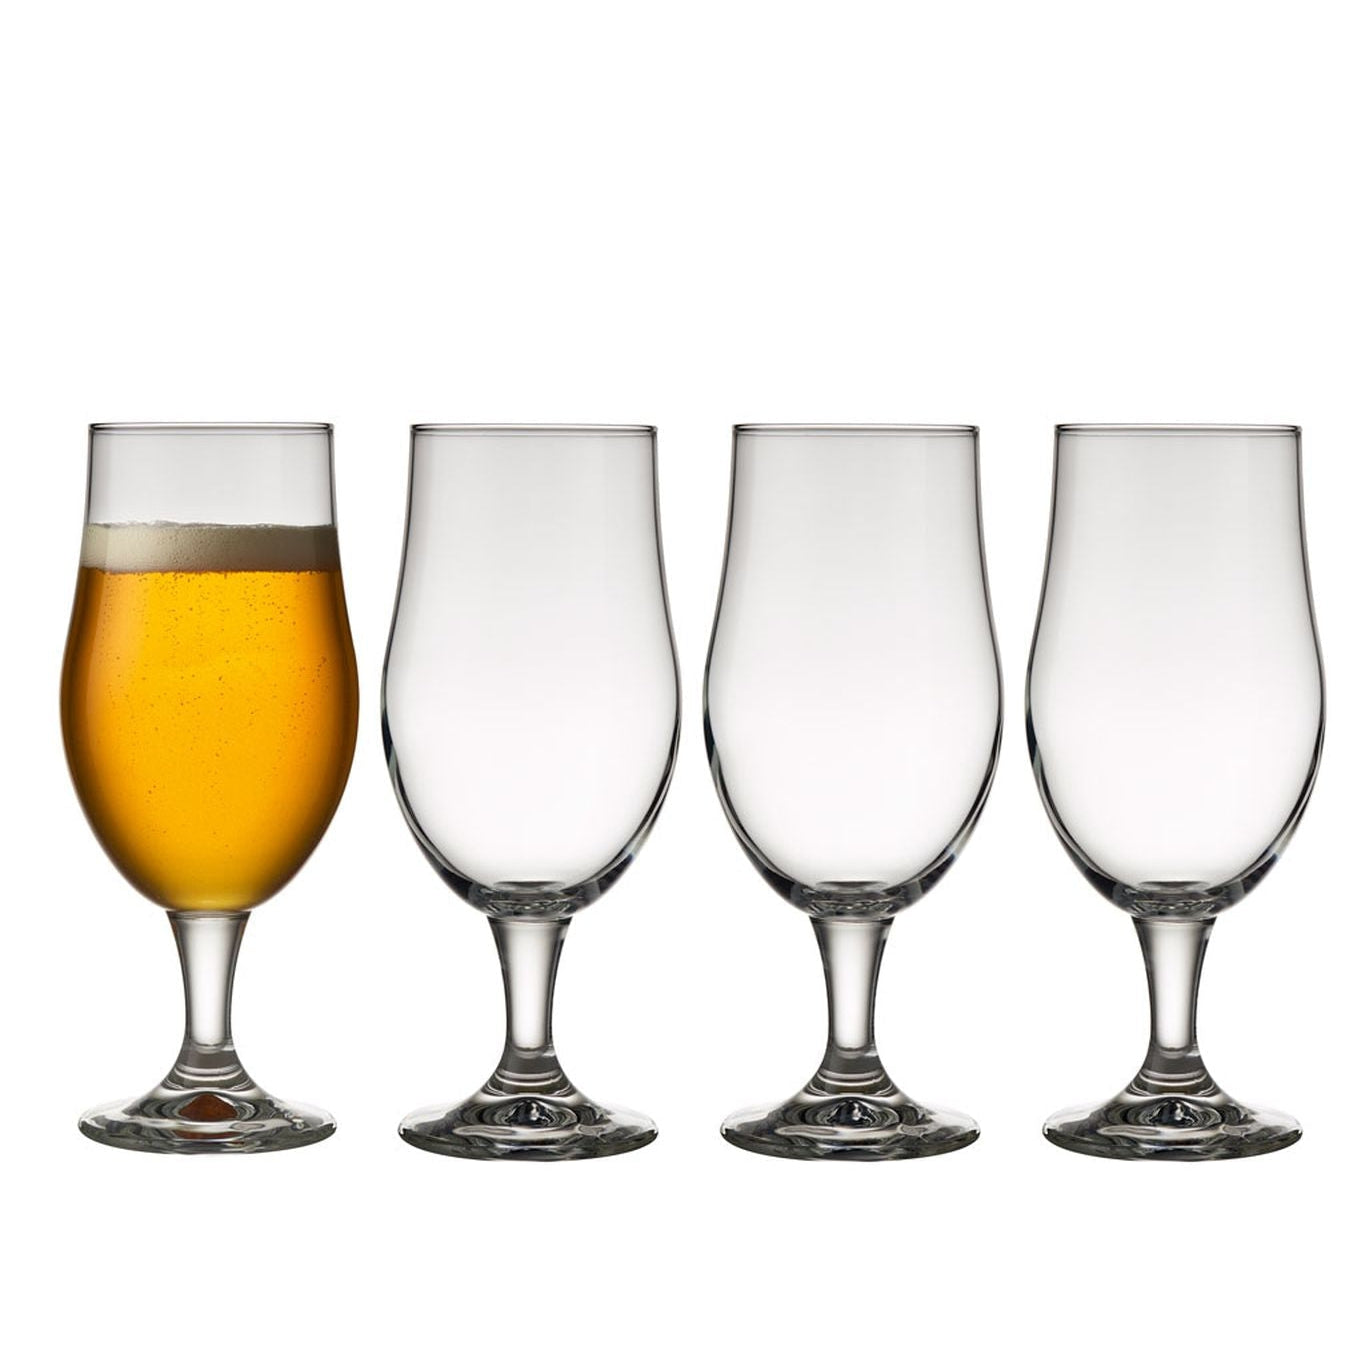 Lyngby Glas Juvel Beer Glass 49 CL, 4 PC.